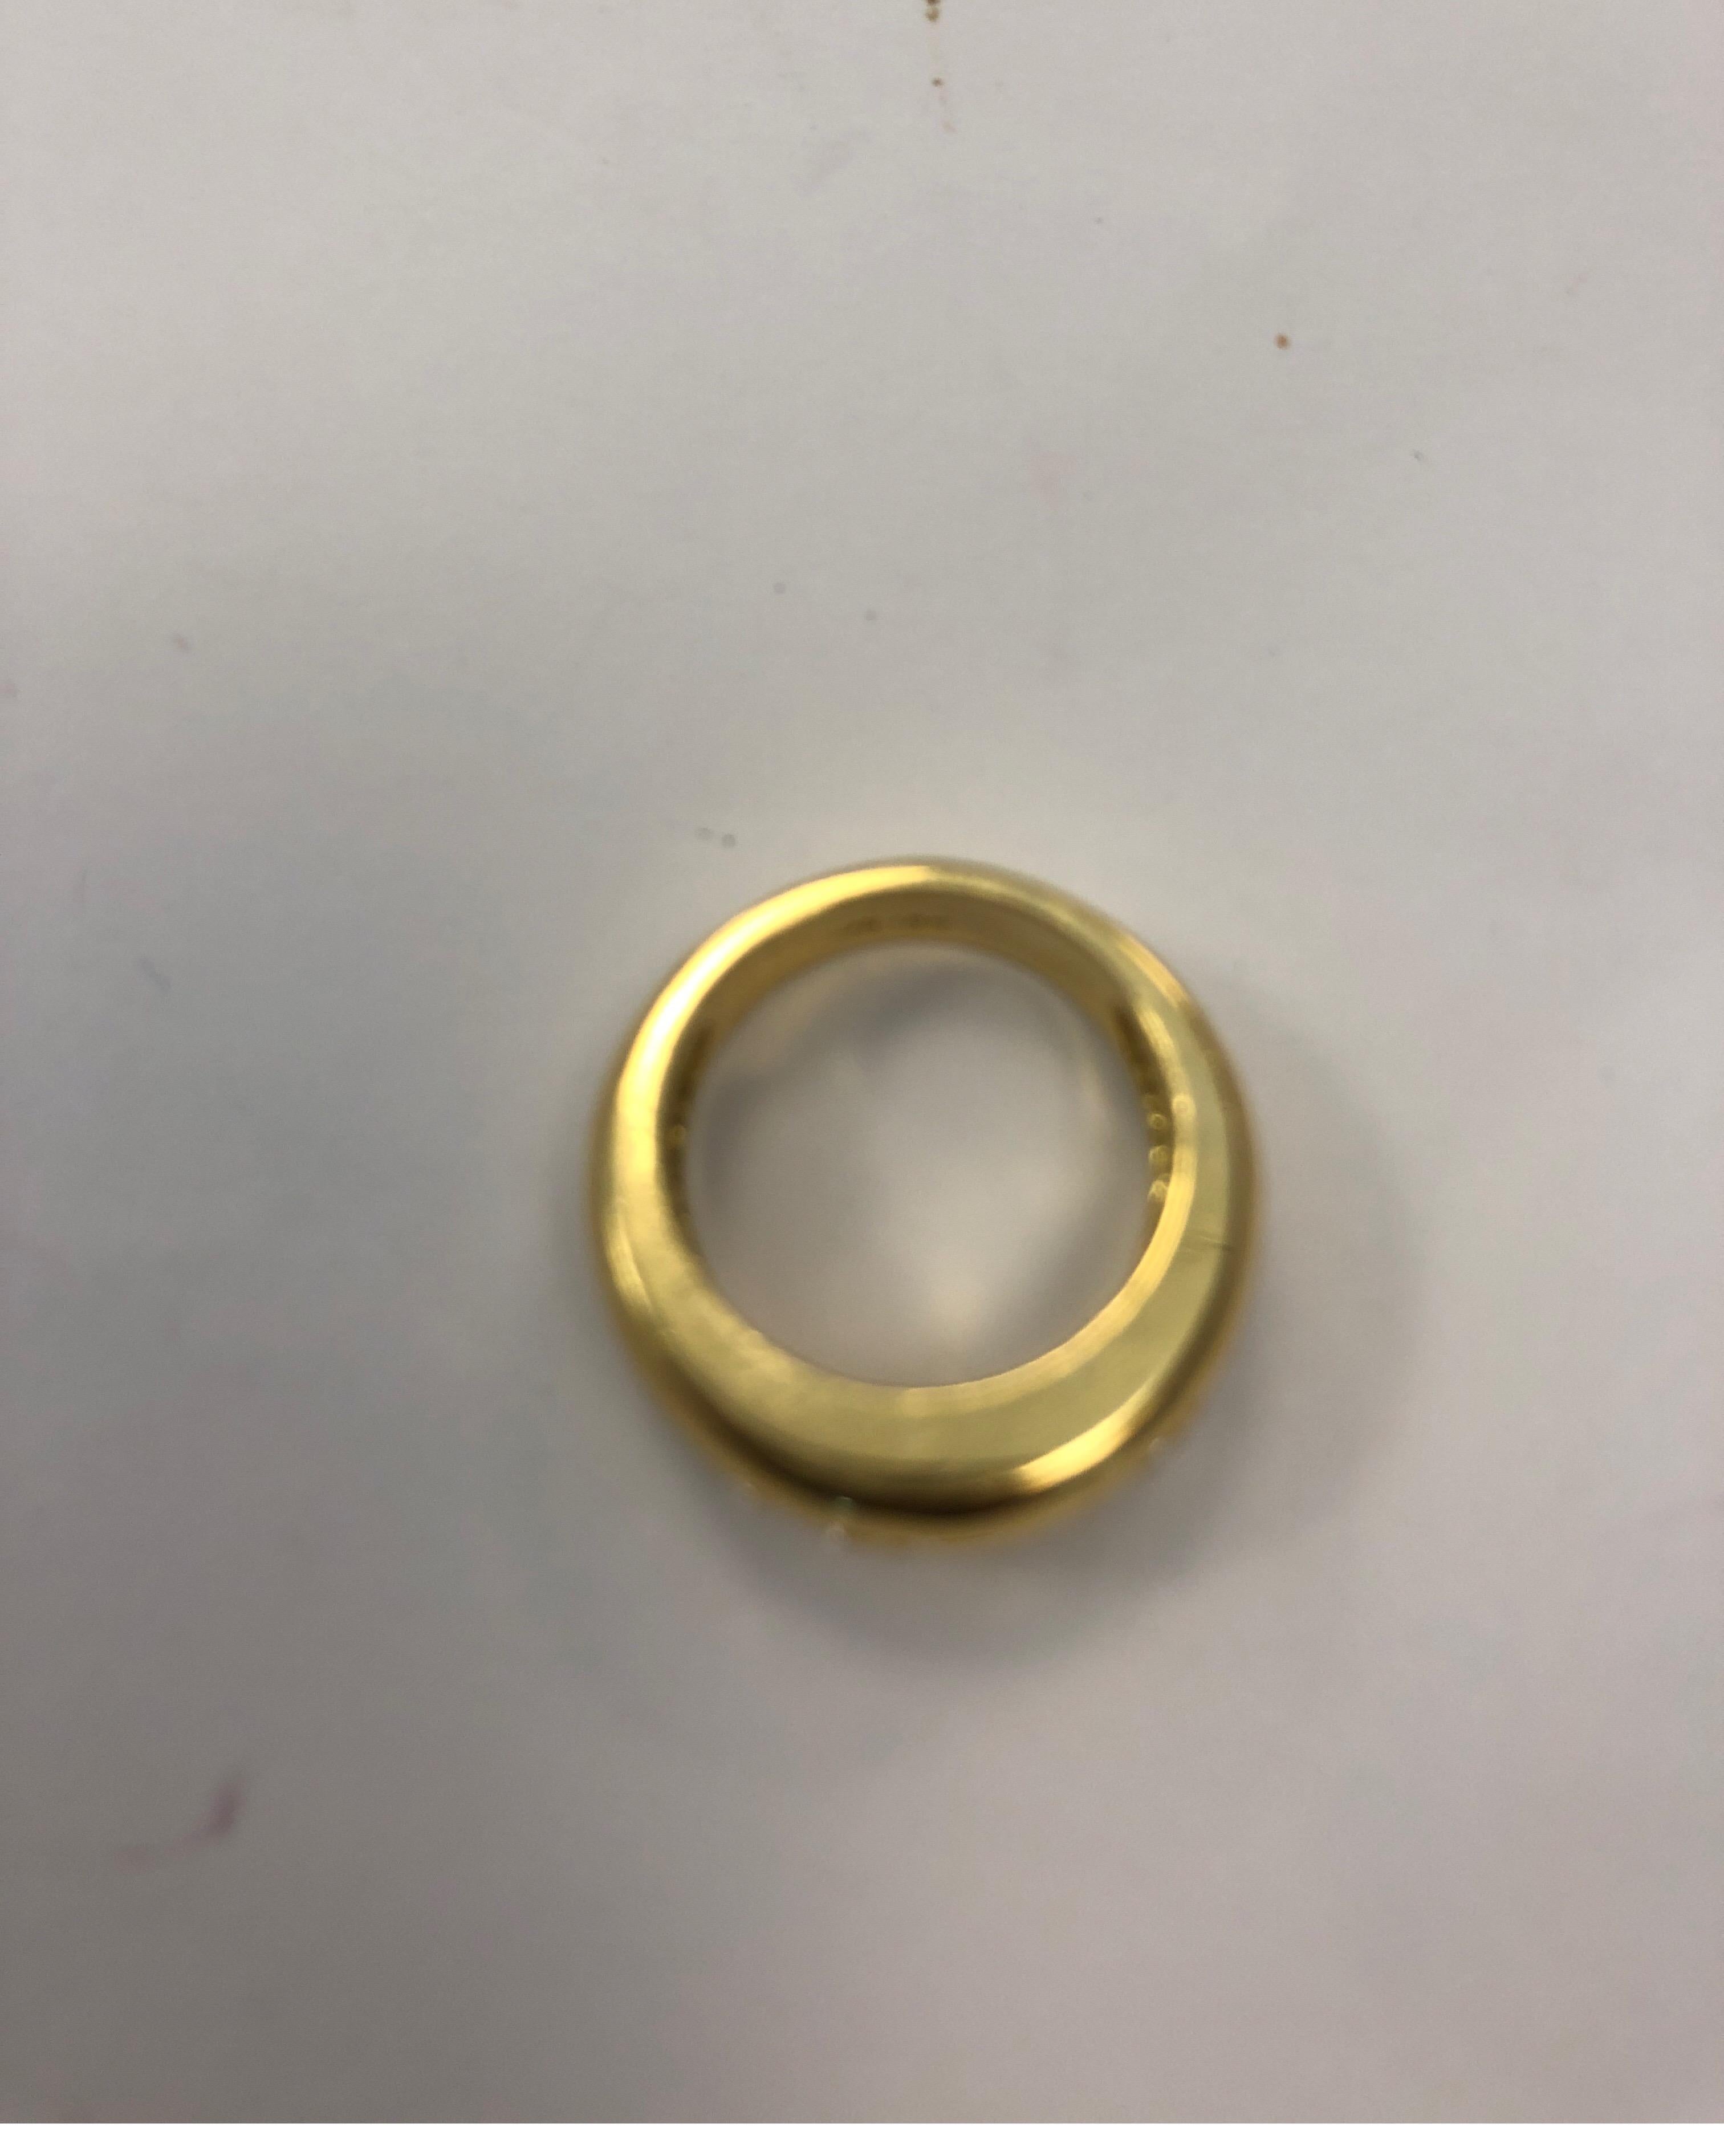 18 K yellow gold band ring channel set with 4 round diamonds, G color, VS clarity
Last retail $ 7250
Finger size 5.75, may be sized